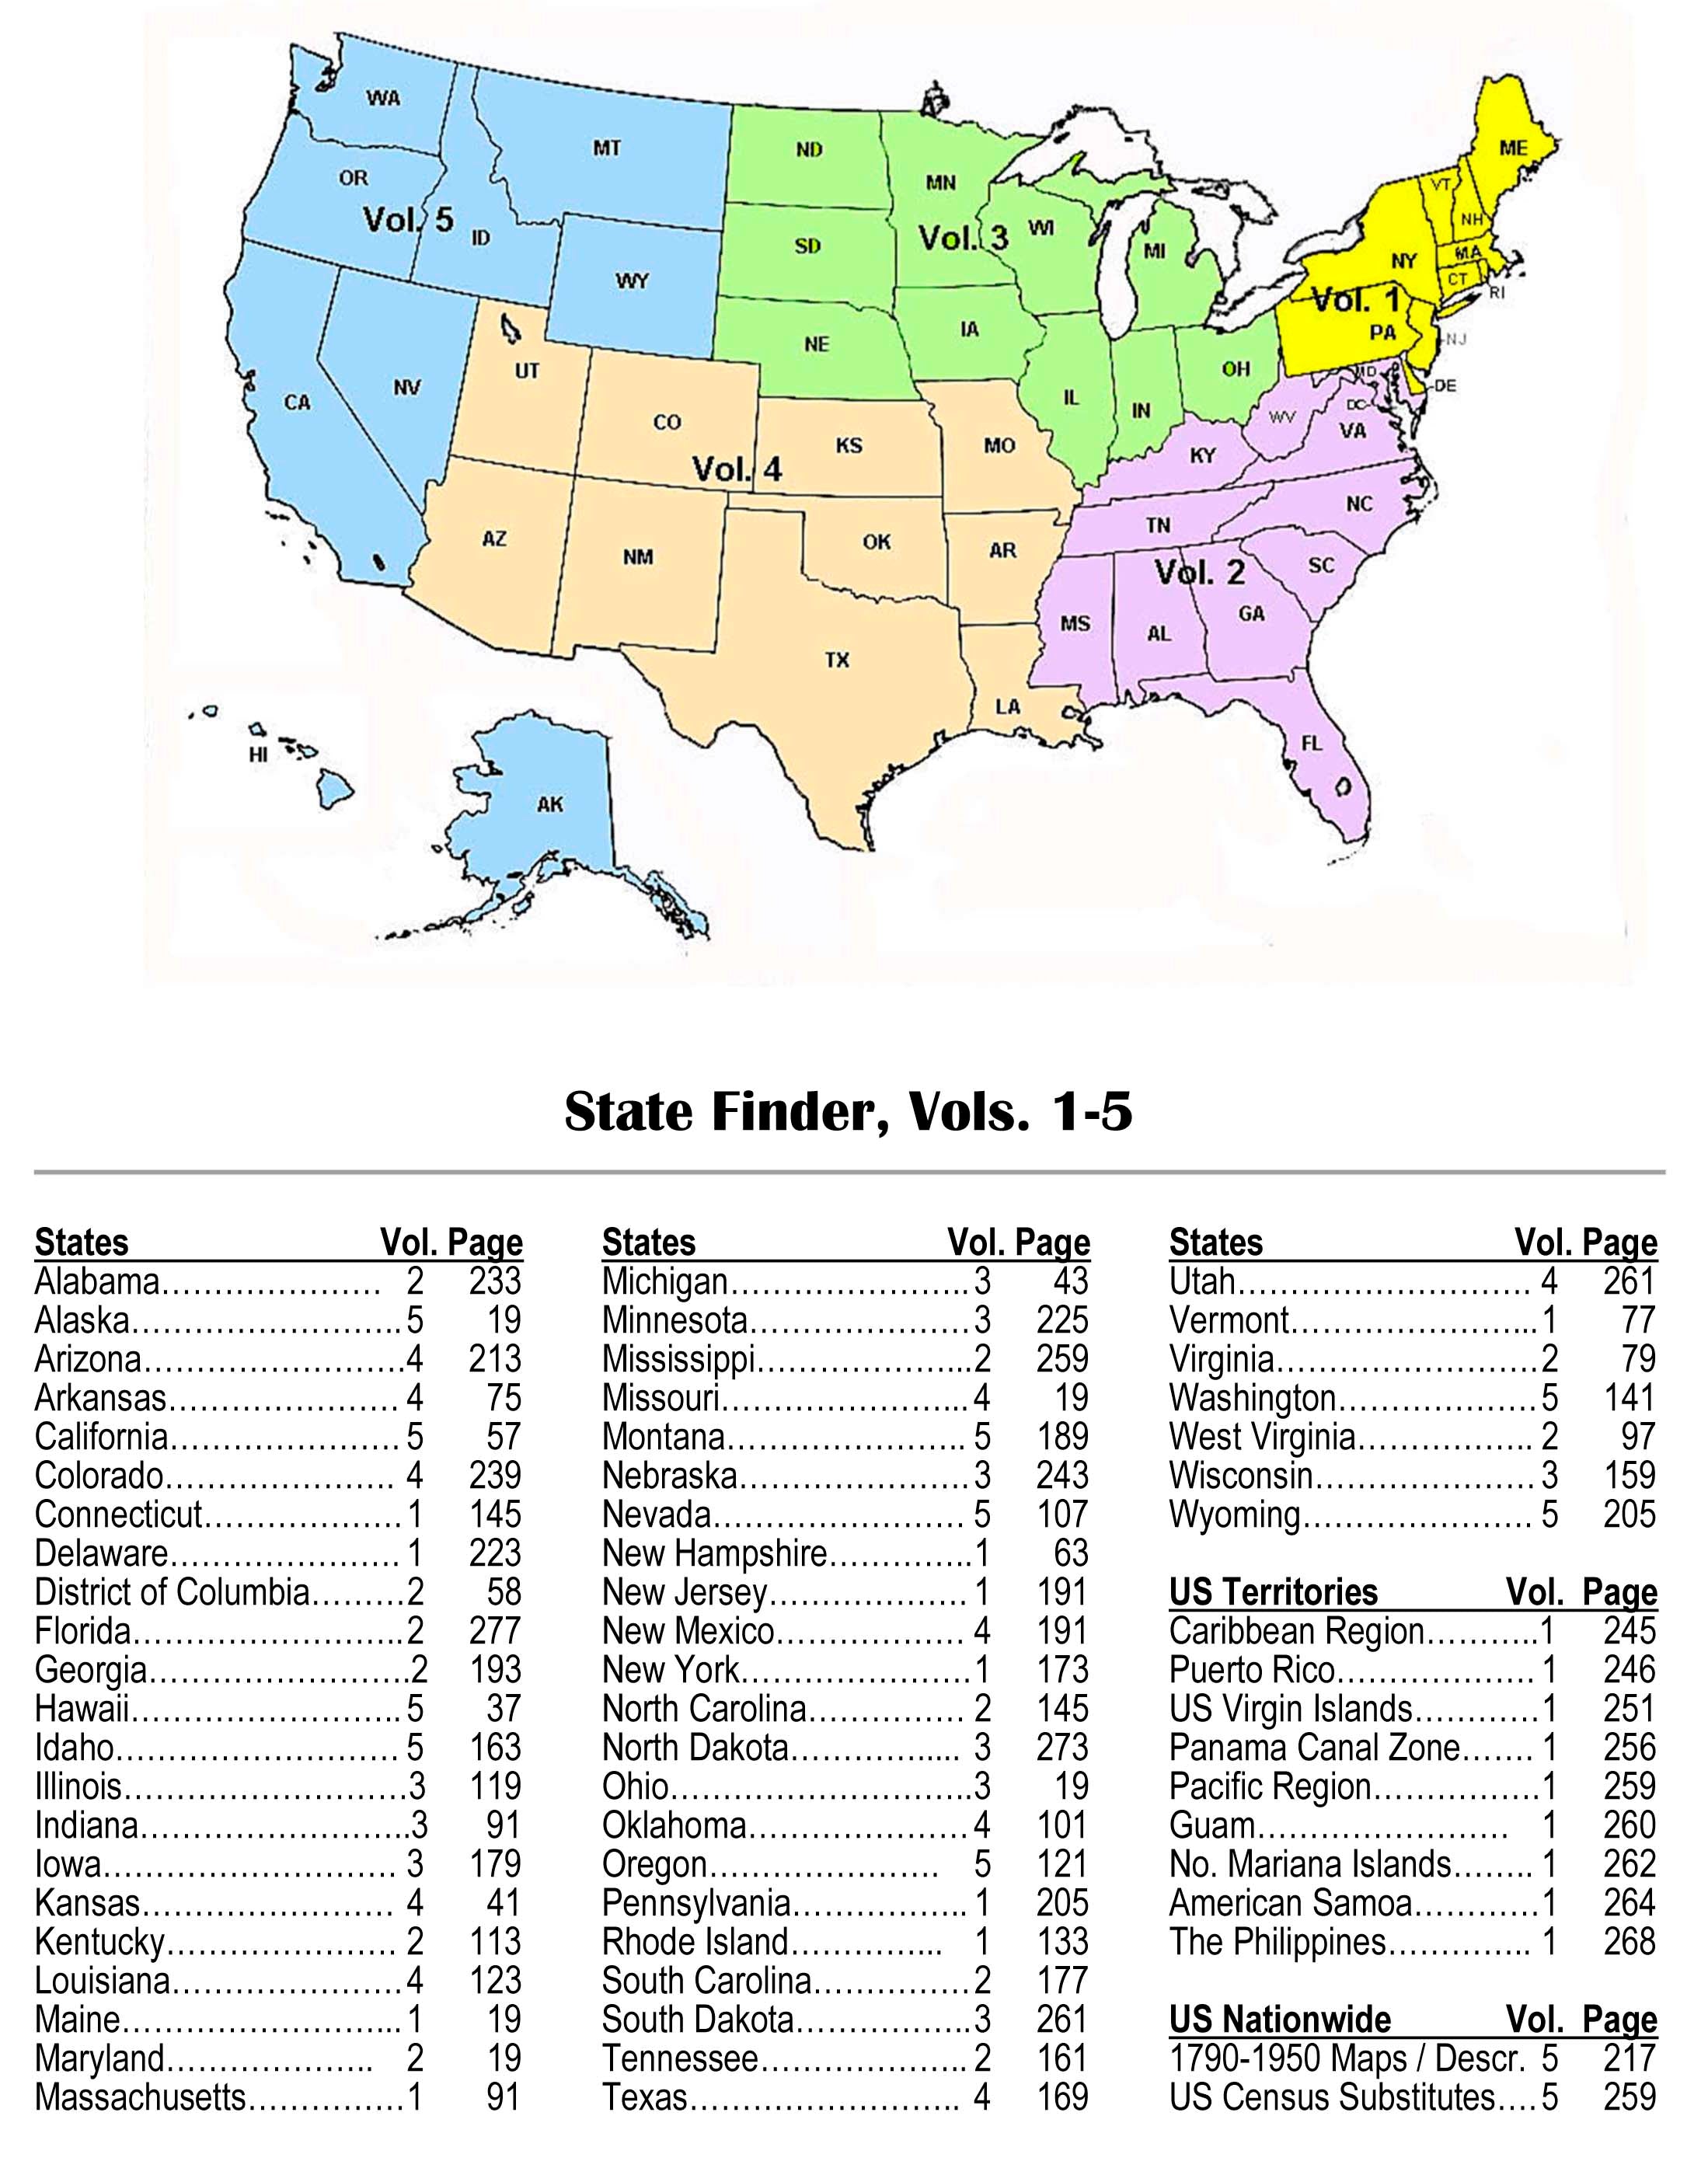 Census Substitutes & State Census Records, Third Edition, Volume 5 – Western / Pacific States & Nationwide Chapter - SOFTBOUND